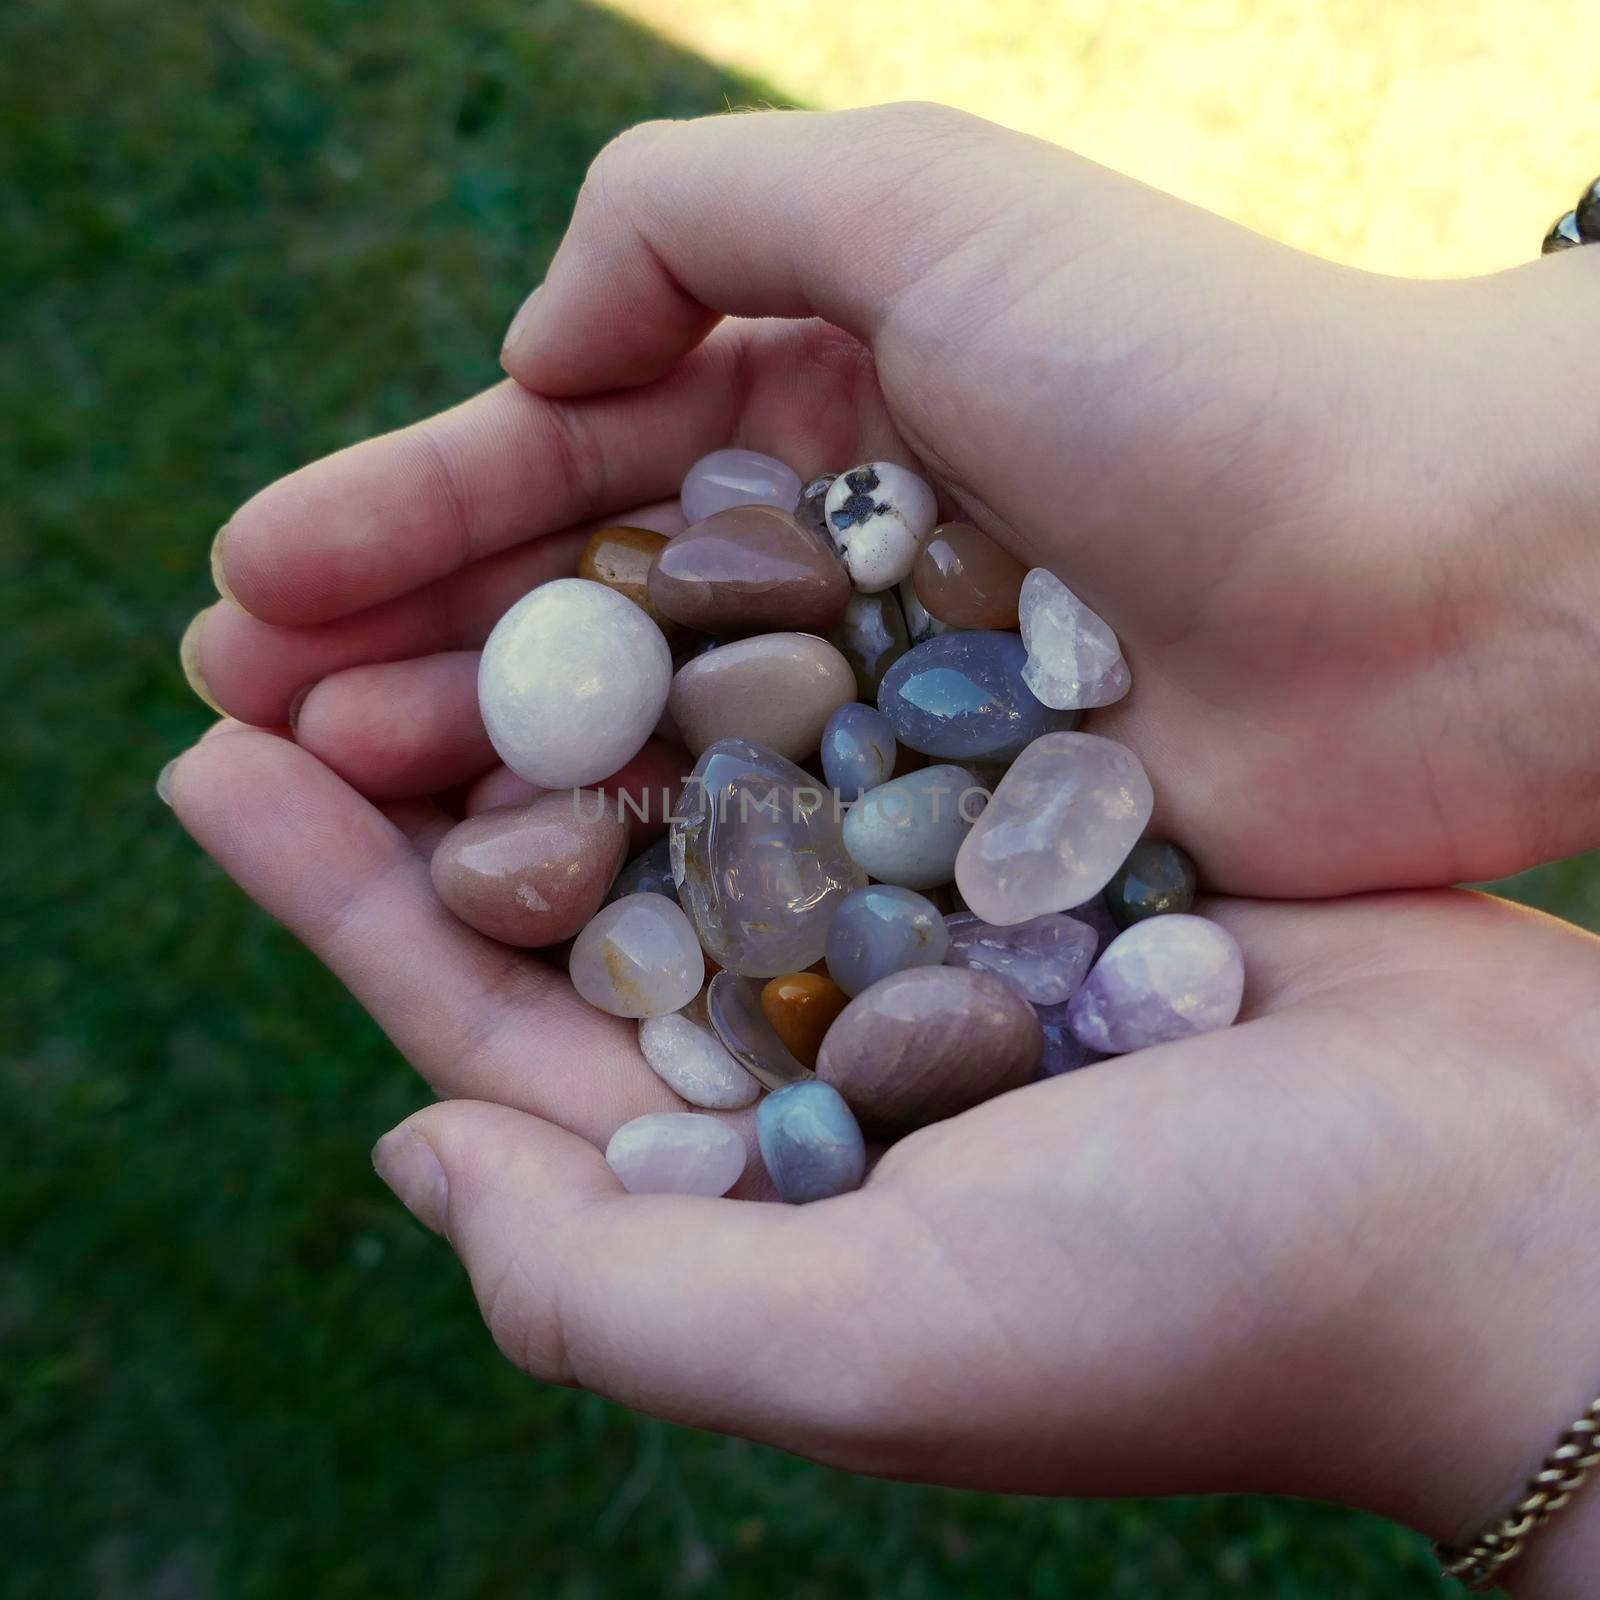 Tumble finished mixture of semi-precious stones in the hands of a girl